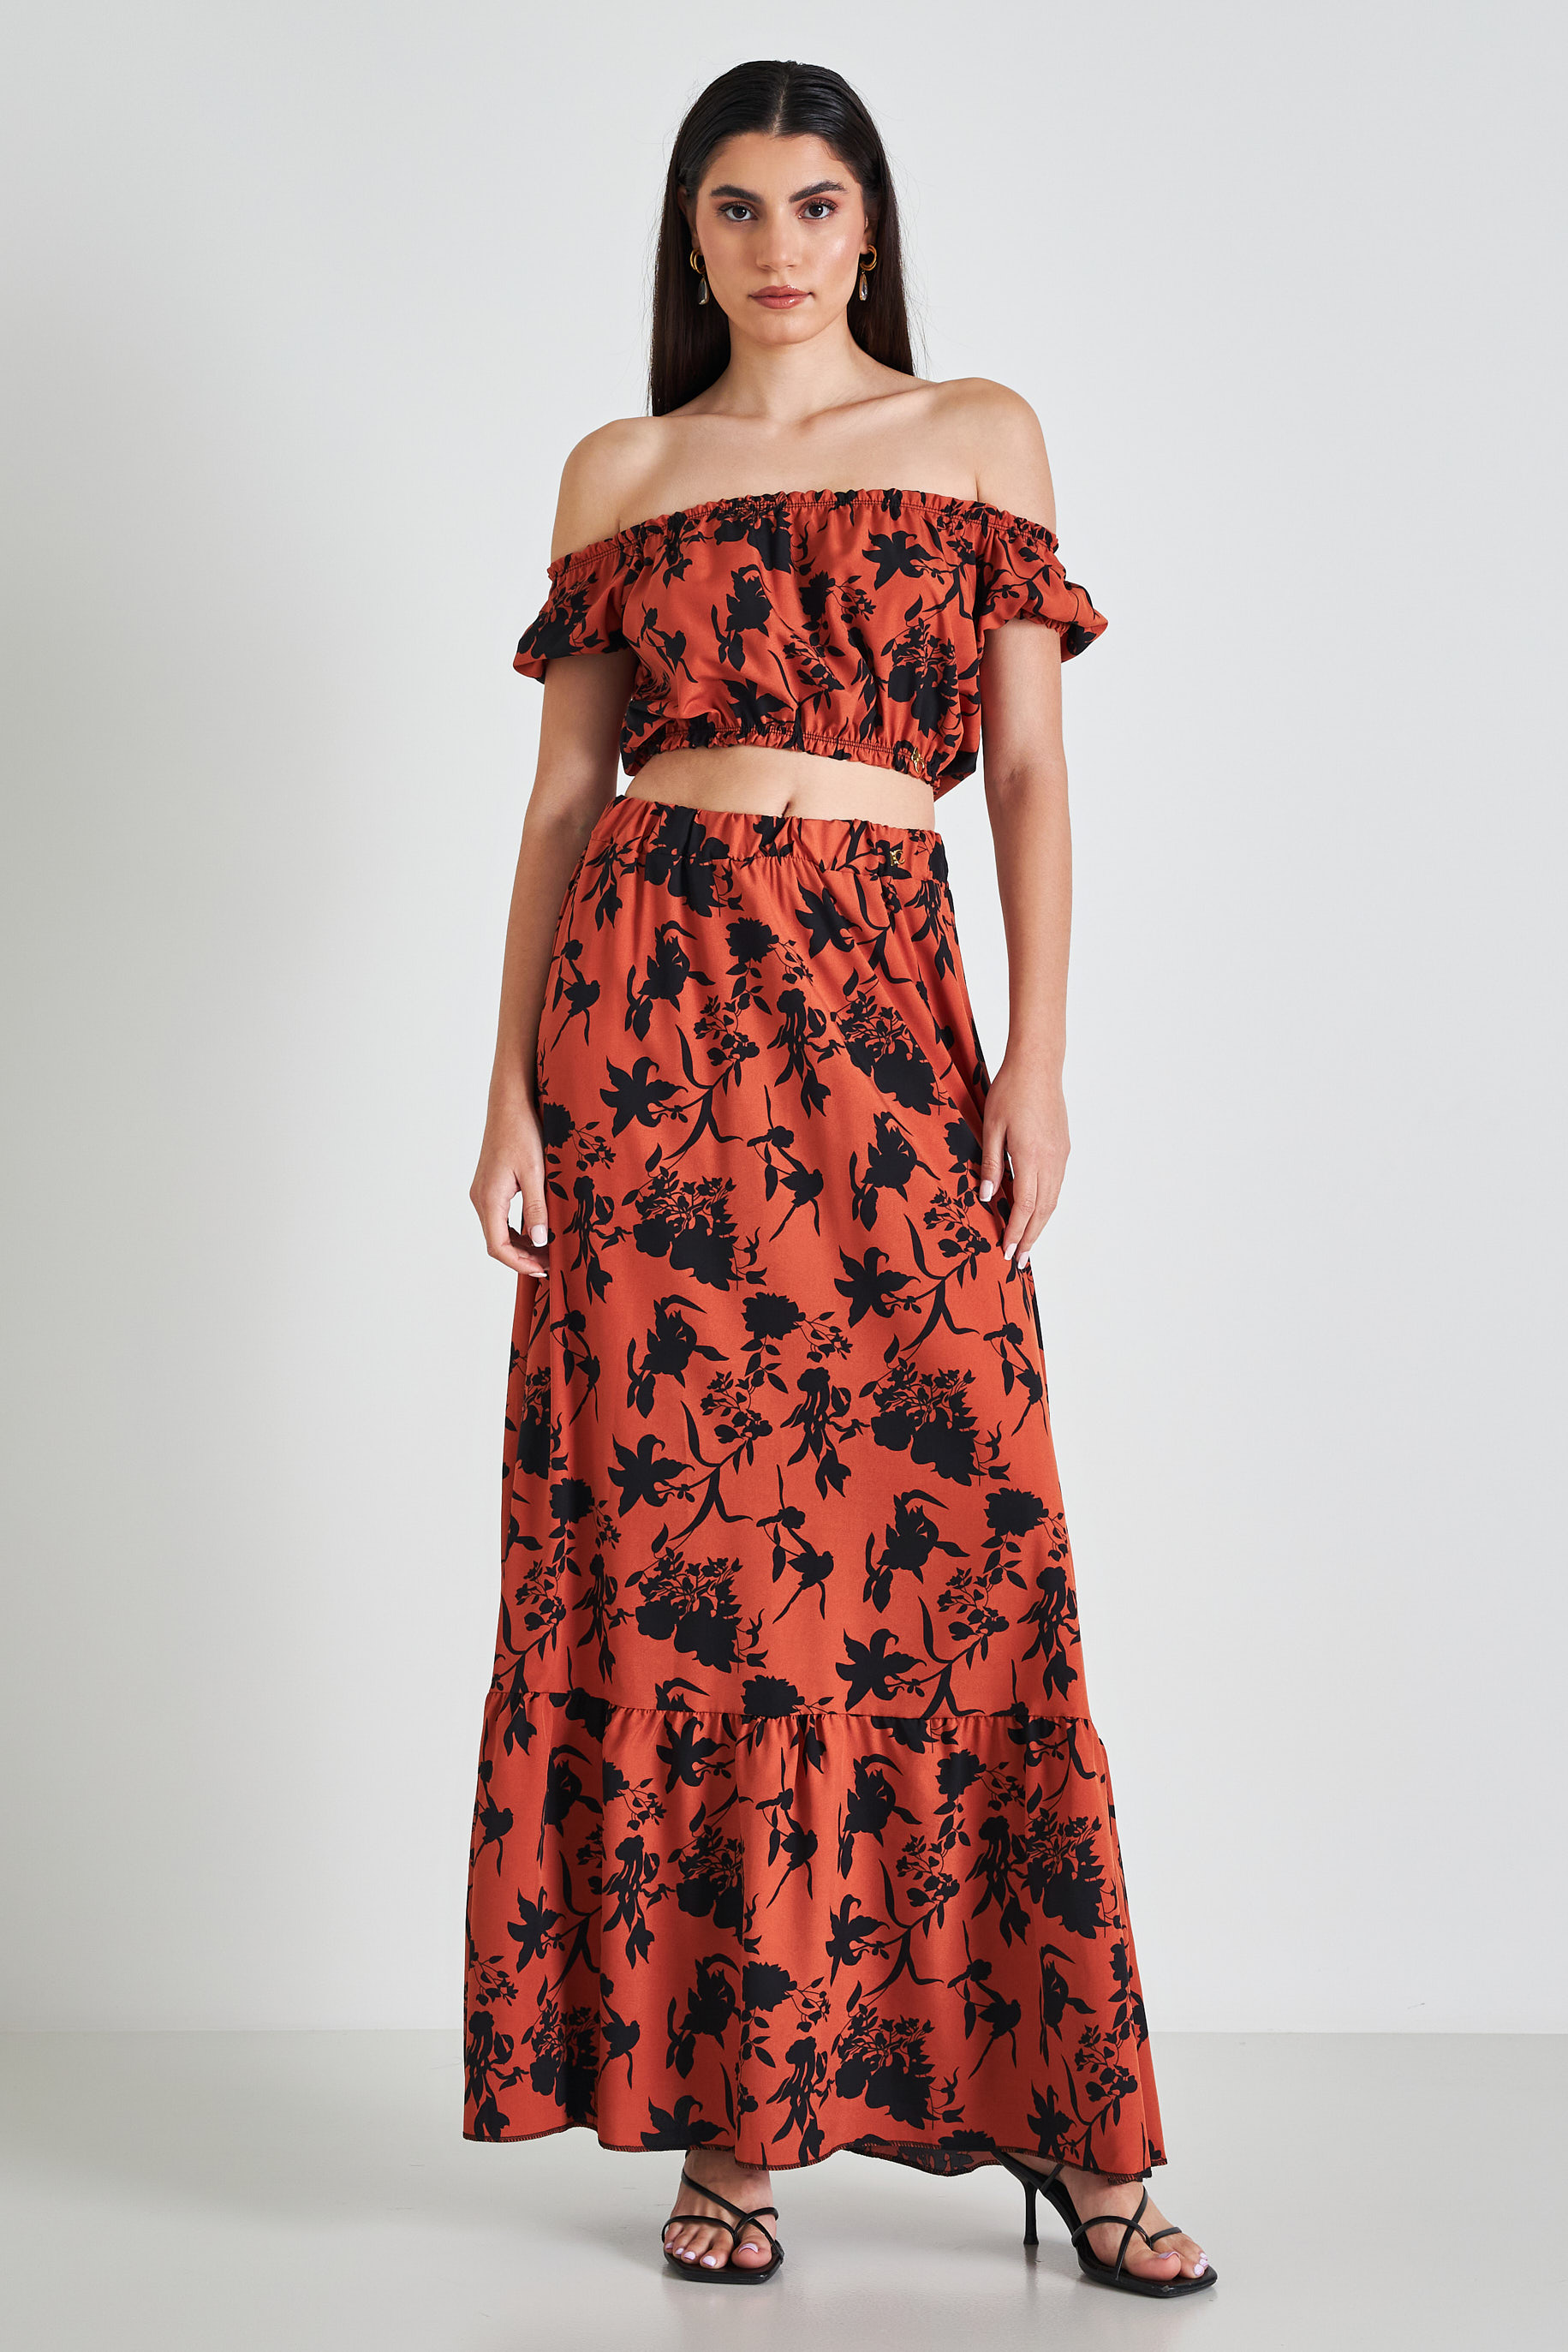 Picture of Crop top floral